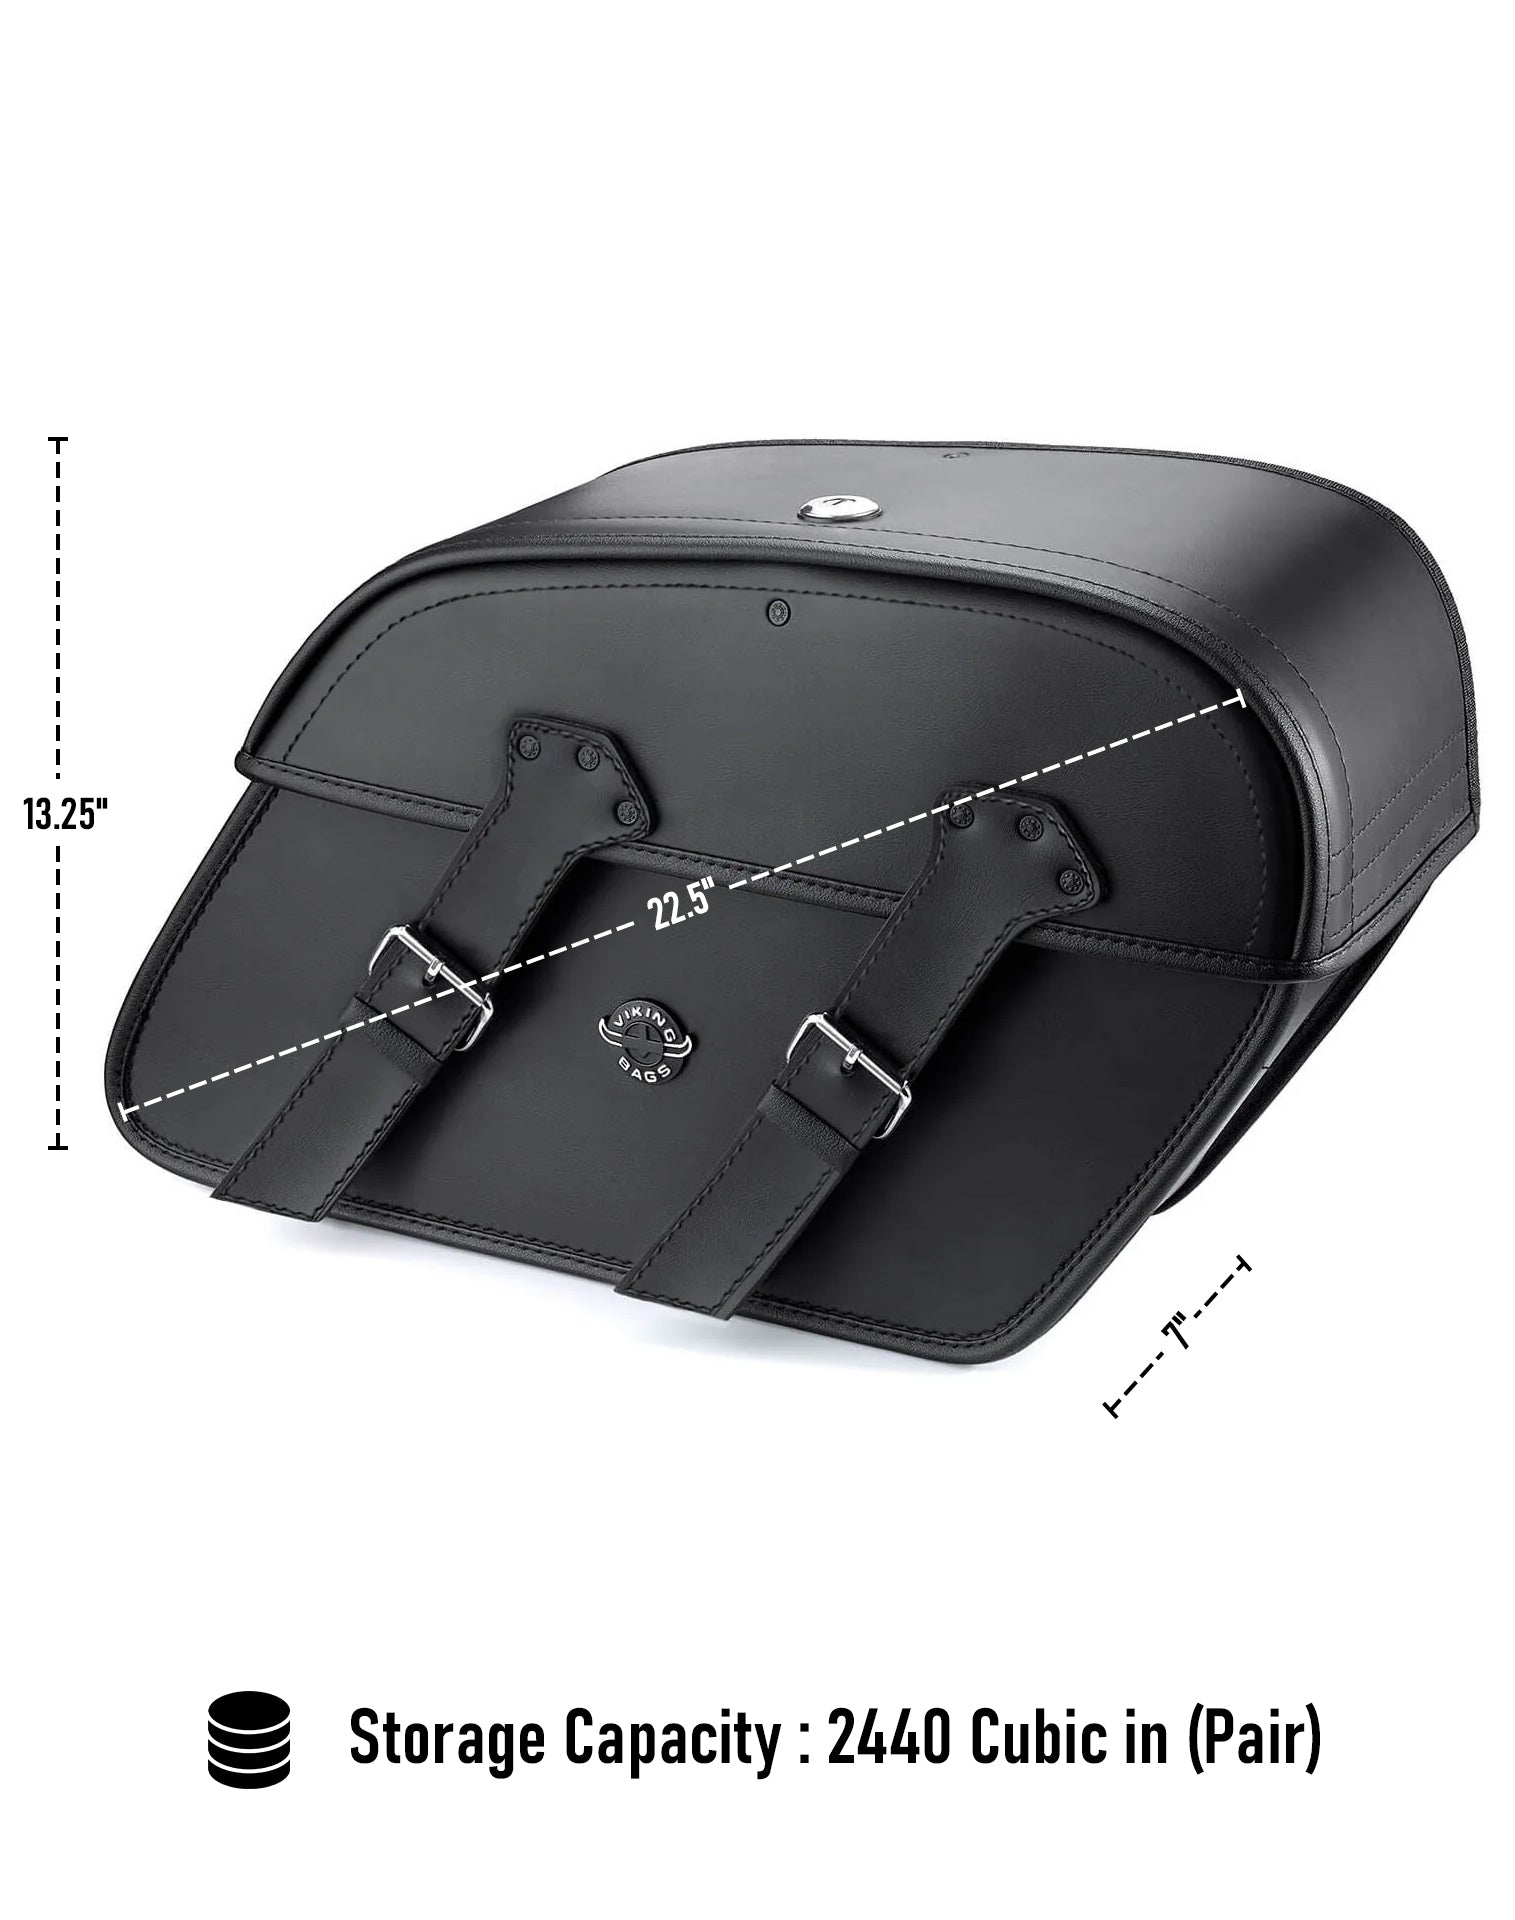 Viking Raven Extra Large Yamaha V Star 950 Leather Motorcycle Saddlebags Can Store Your Ridings Gears